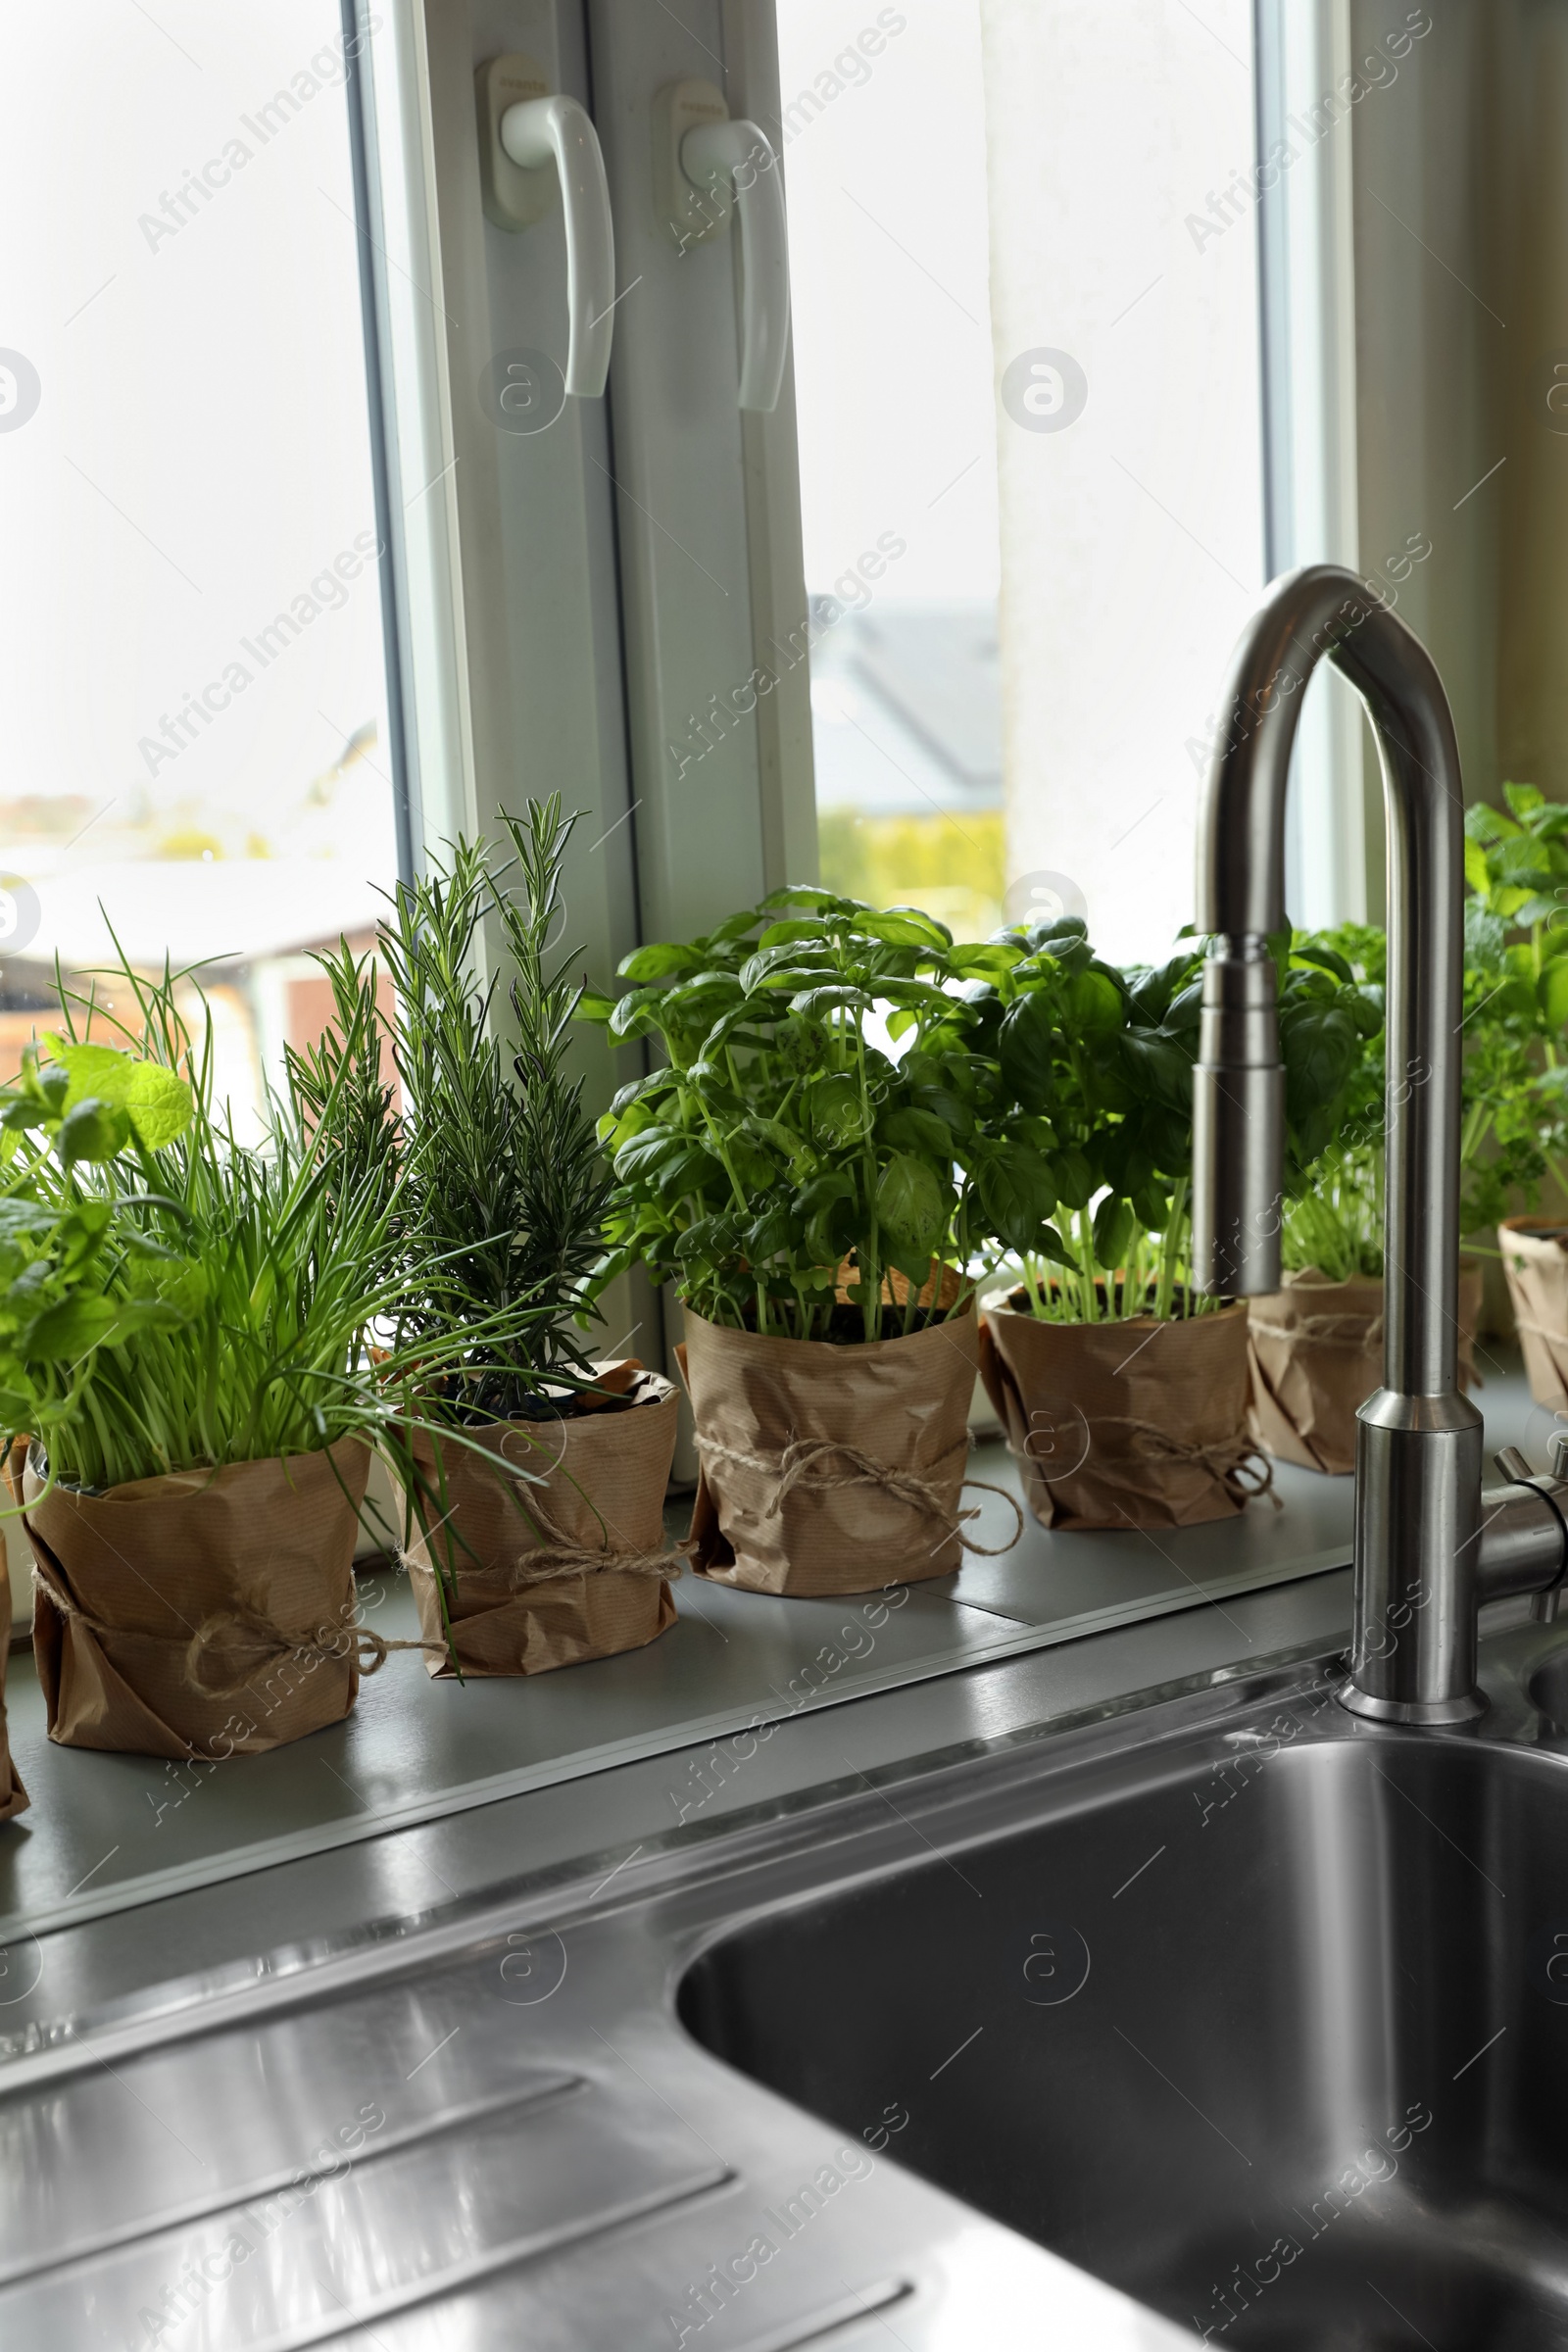 Photo of Different aromatic potted herbs on window sill near kitchen sink